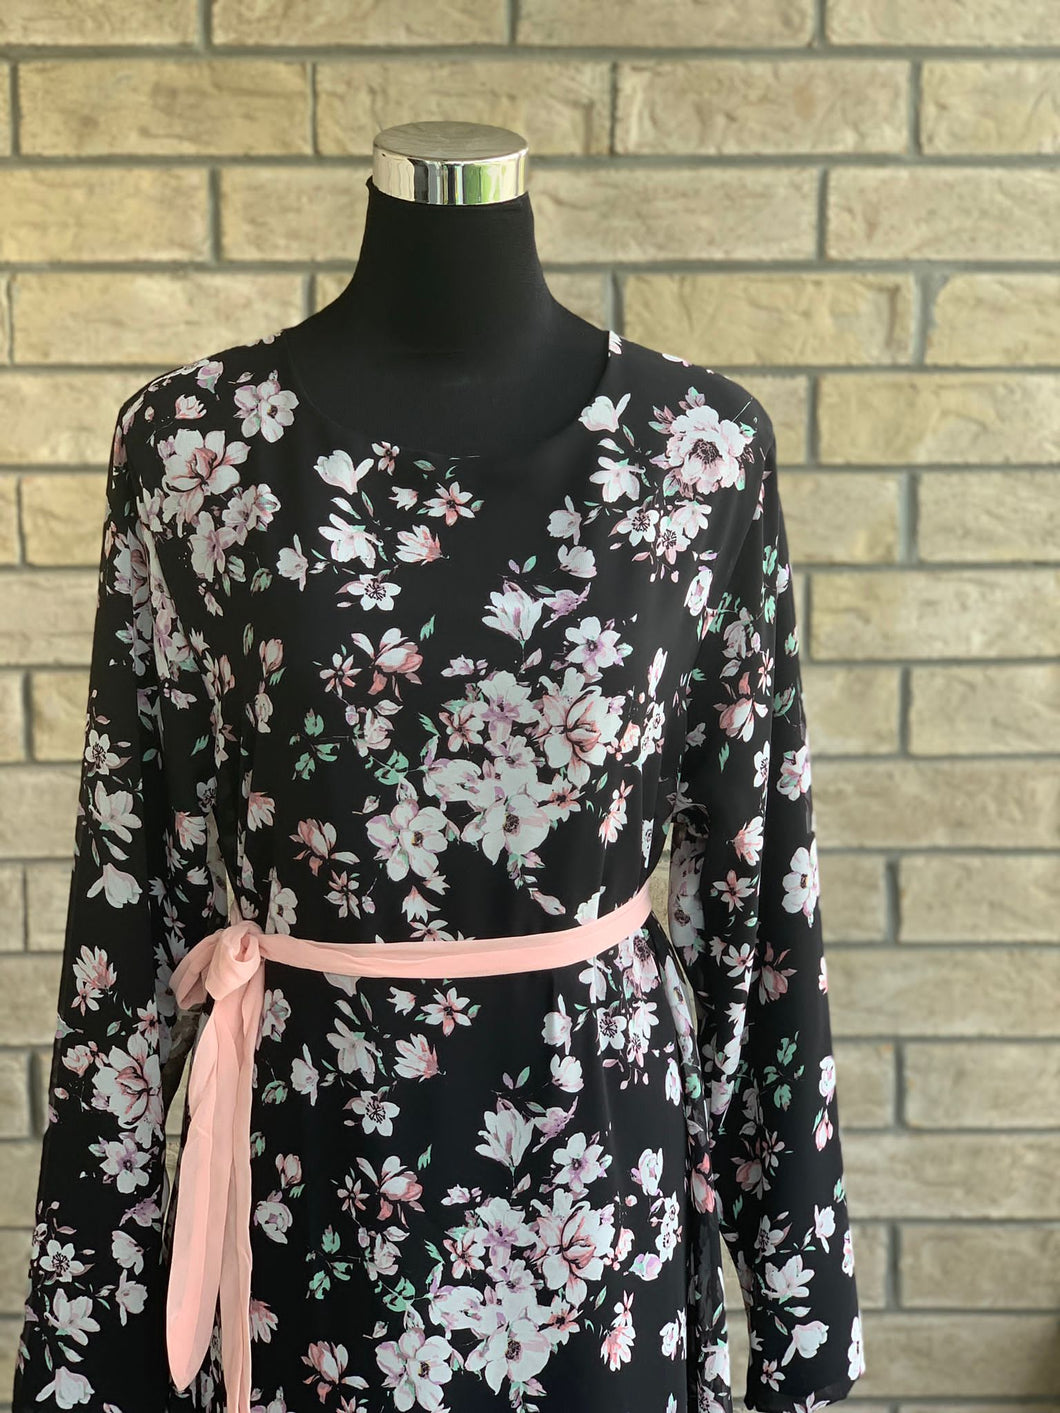 The Asiya Dress features gorgeous blooms and can be dressed up or down for any occasion. This beautiful dress can be worn with or without the matching belt for endless style options.  Material: Chiffon  Free Size: Fits S-XXL  Color may look different due to different screen resolution 